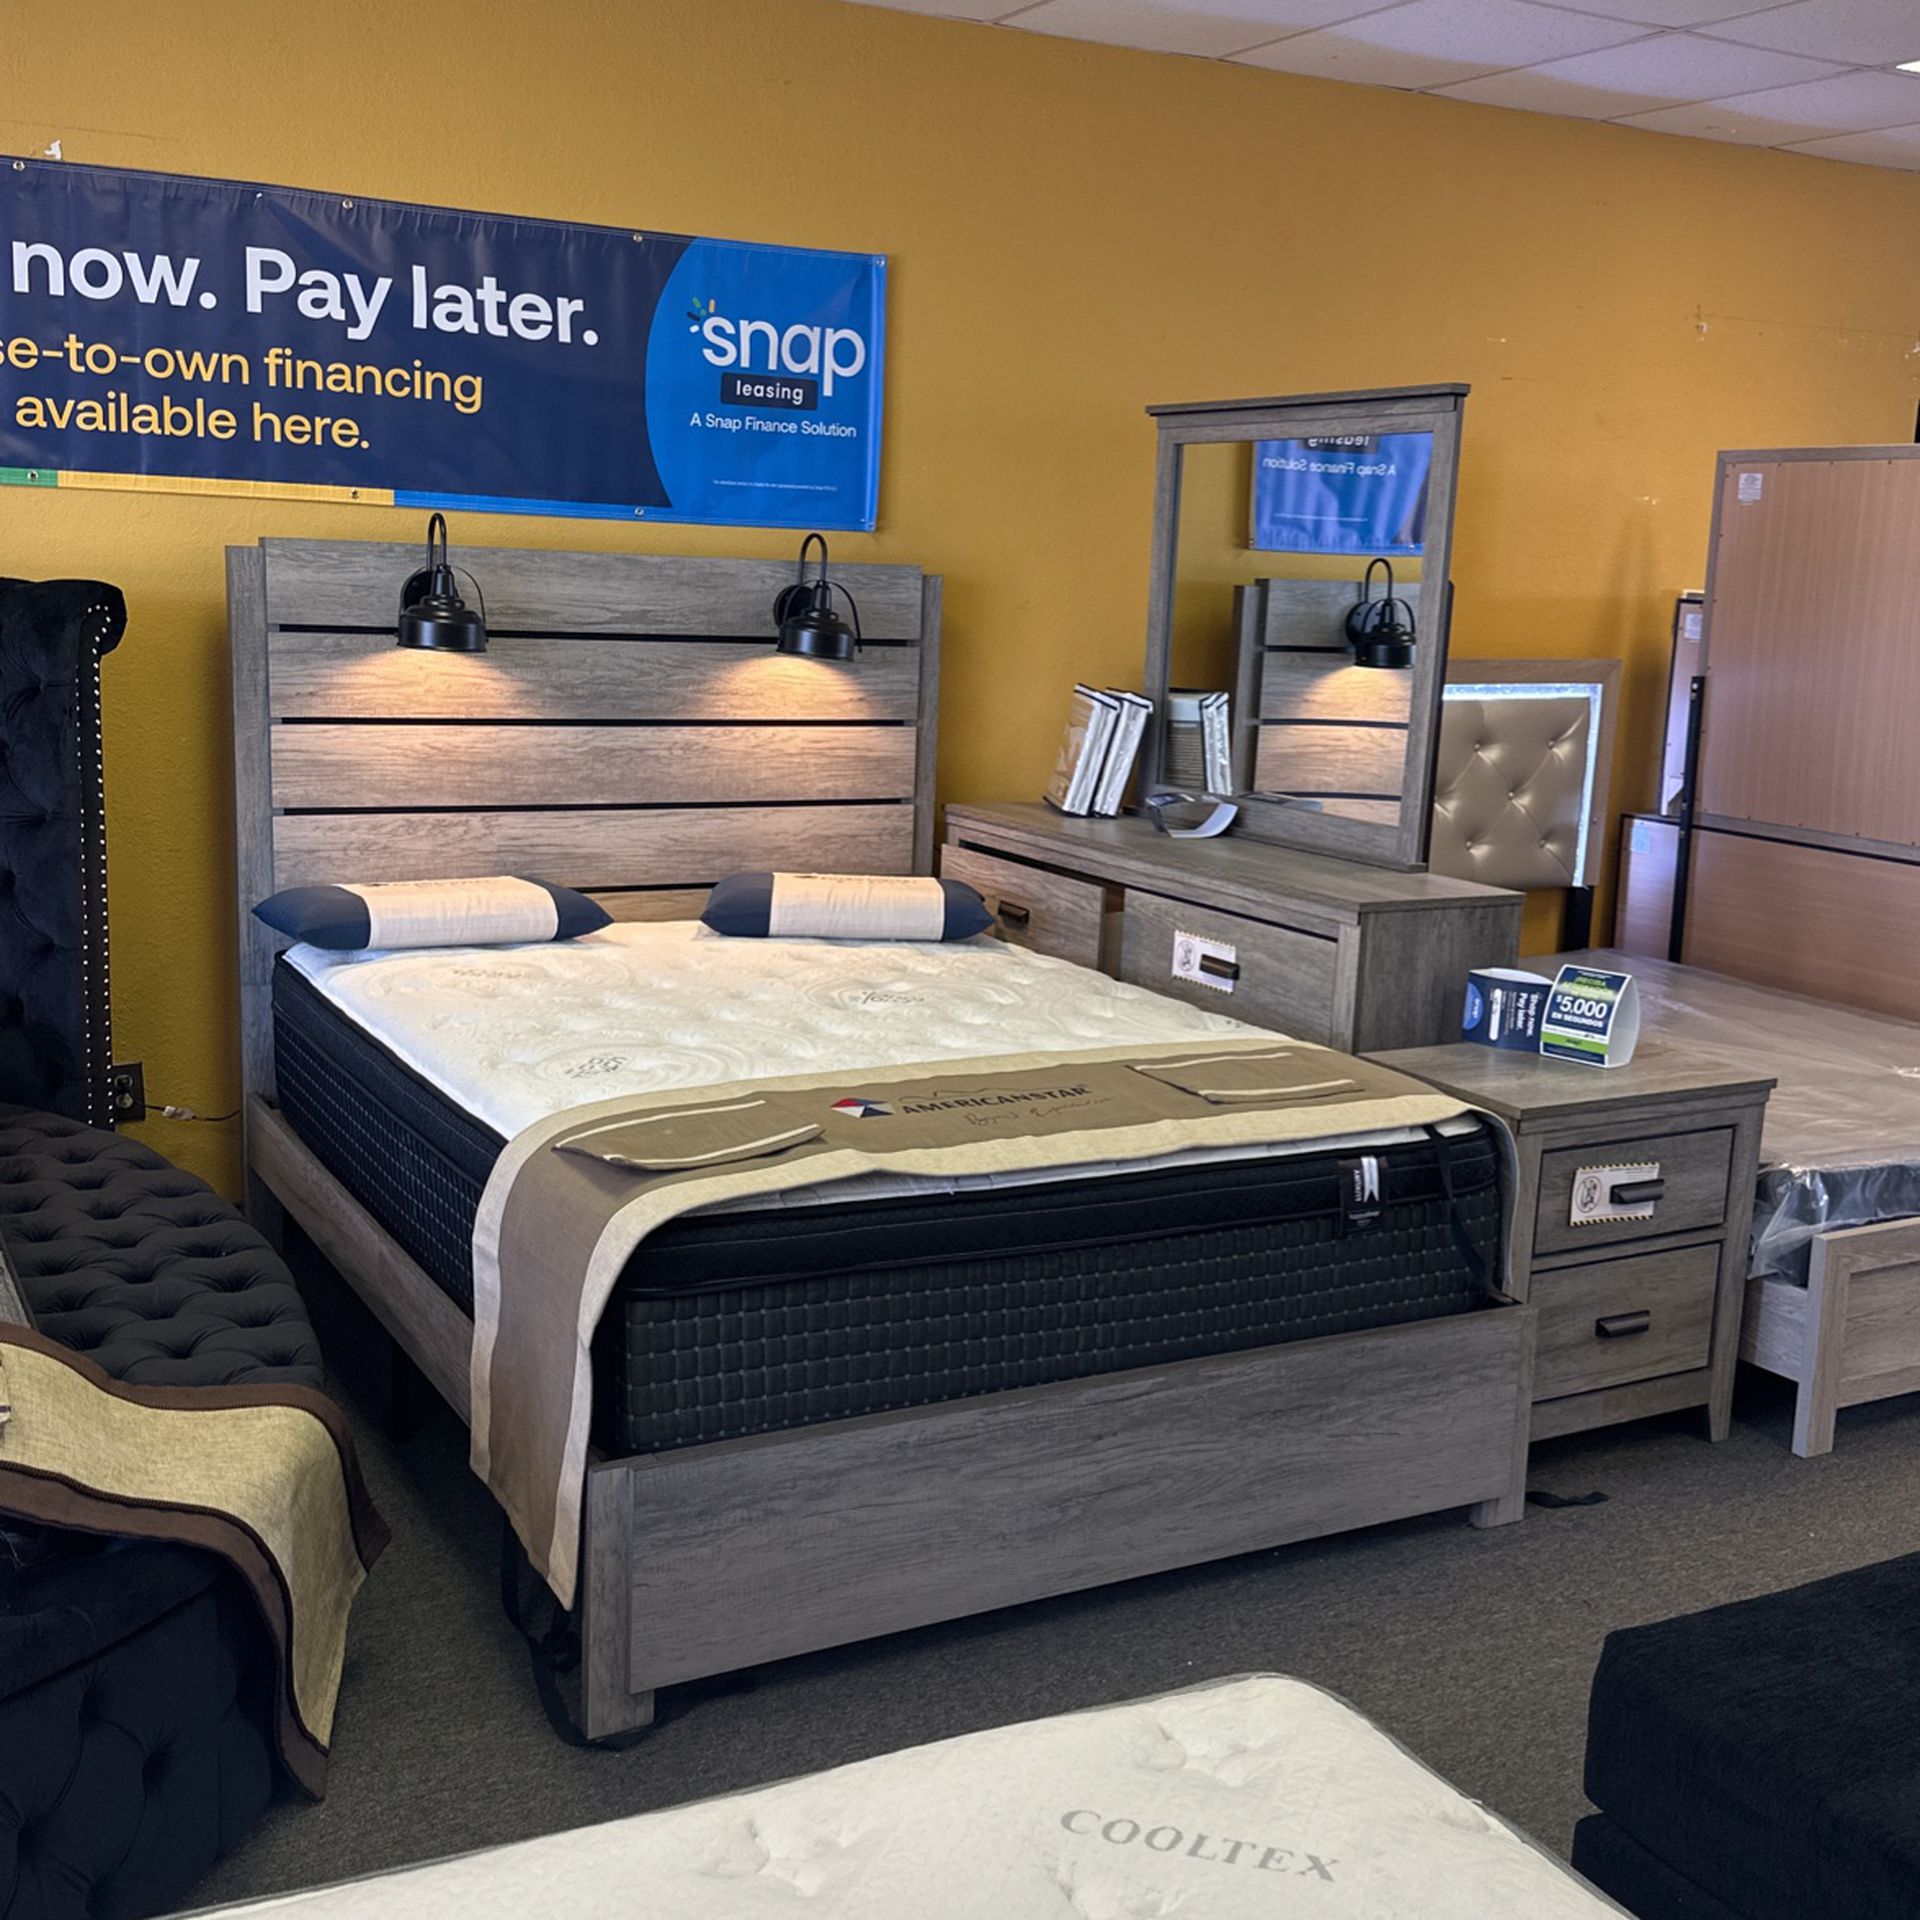 New Queen Size 4 Piece Cam Bed Includes Bedframe, Mirror, Dresser, And Nightstand With Free Delivery